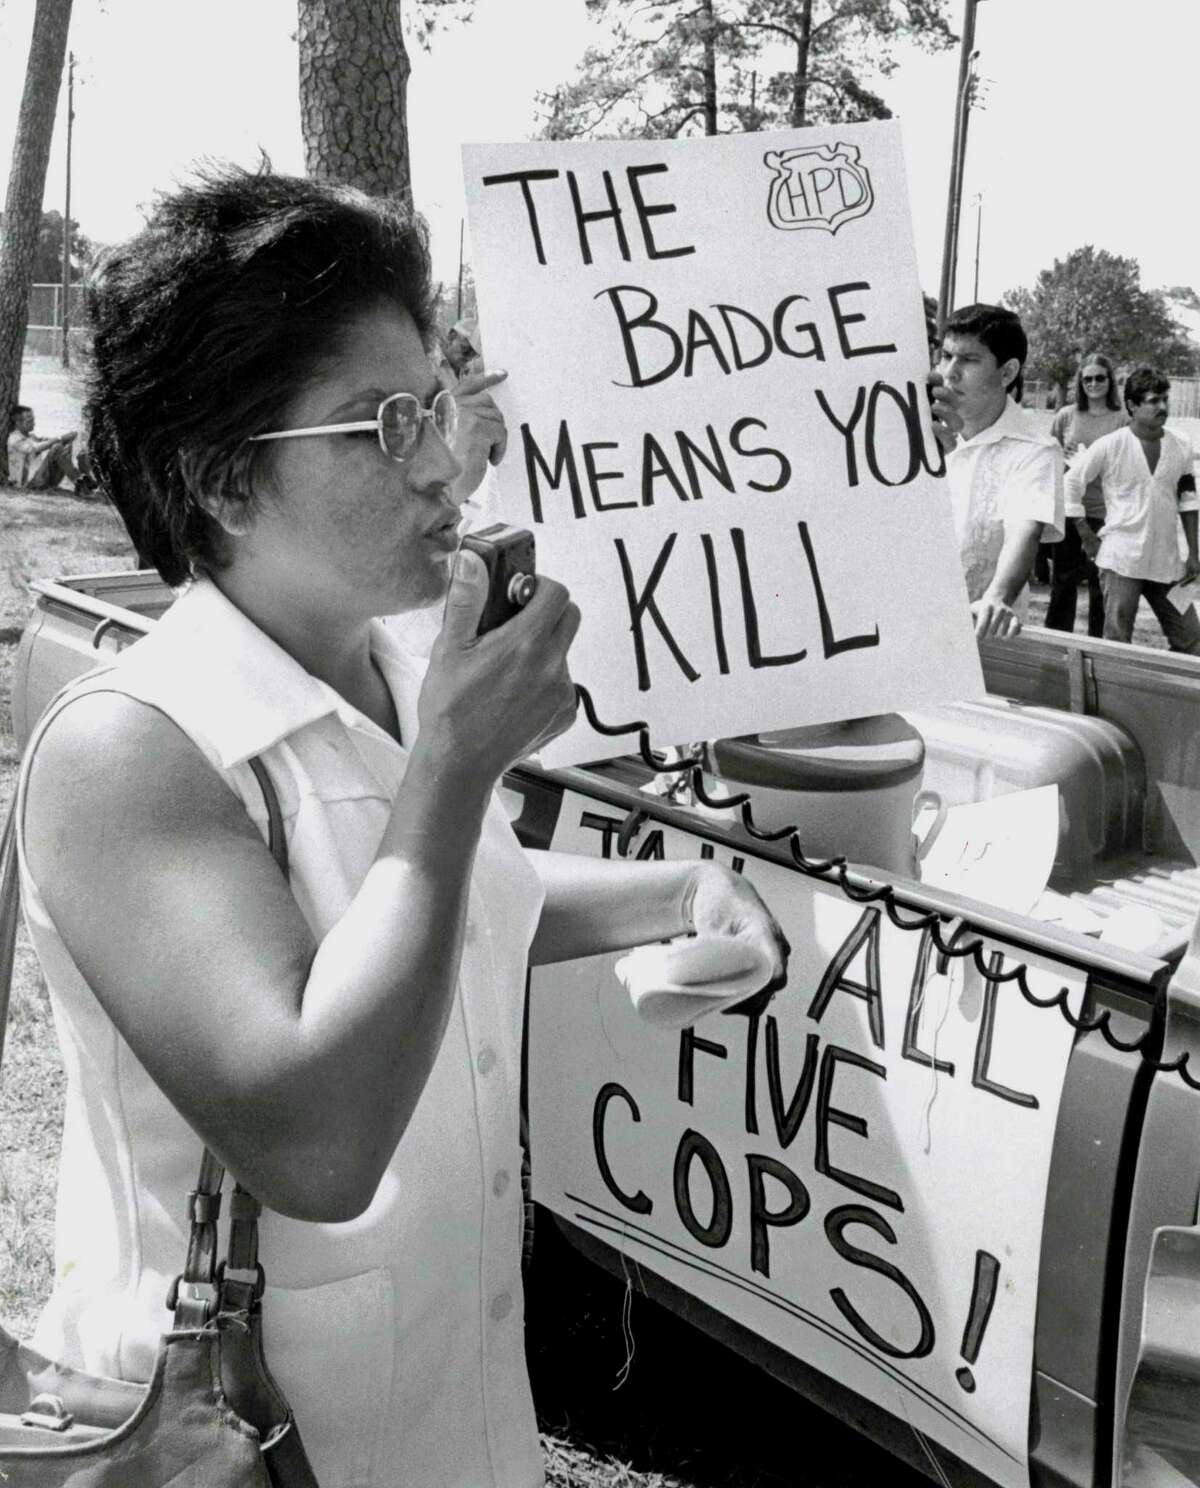 Margarita Torres, mother of Joe Campos Torres (killed by police) speaks to marchers in Moody Park before march Oct. 8, 1977.